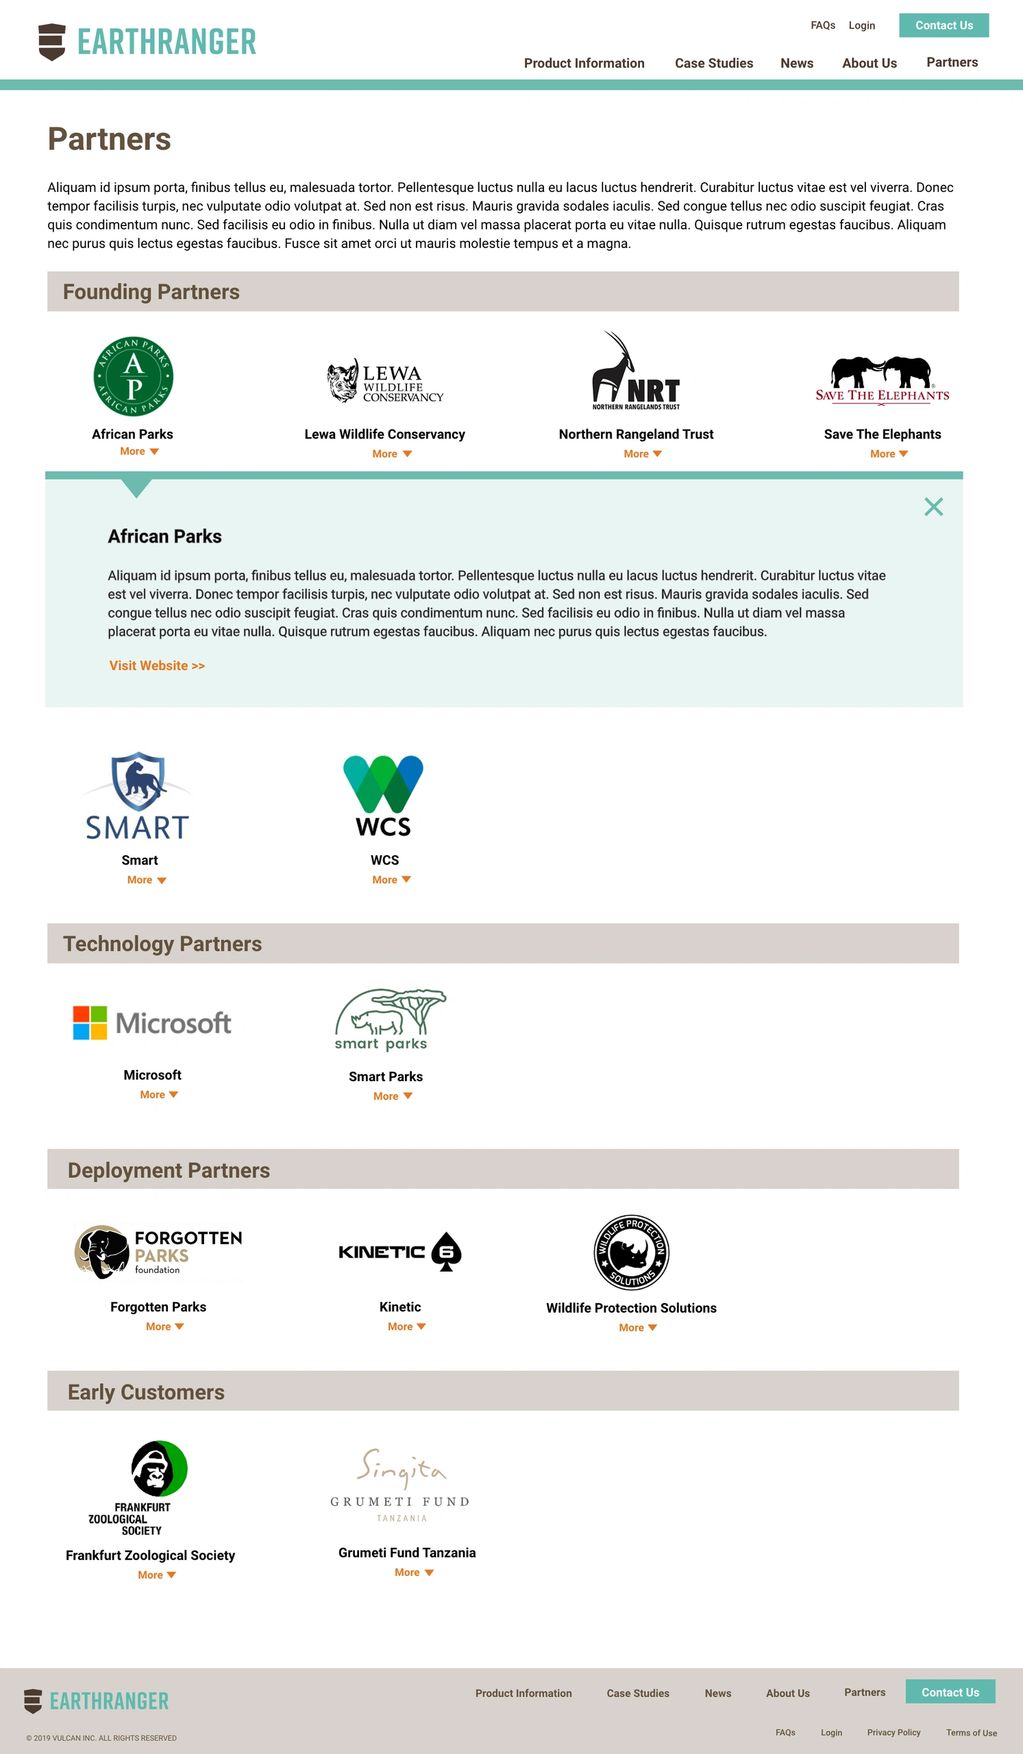 Showing the logos and more information about EarthRanger partners.